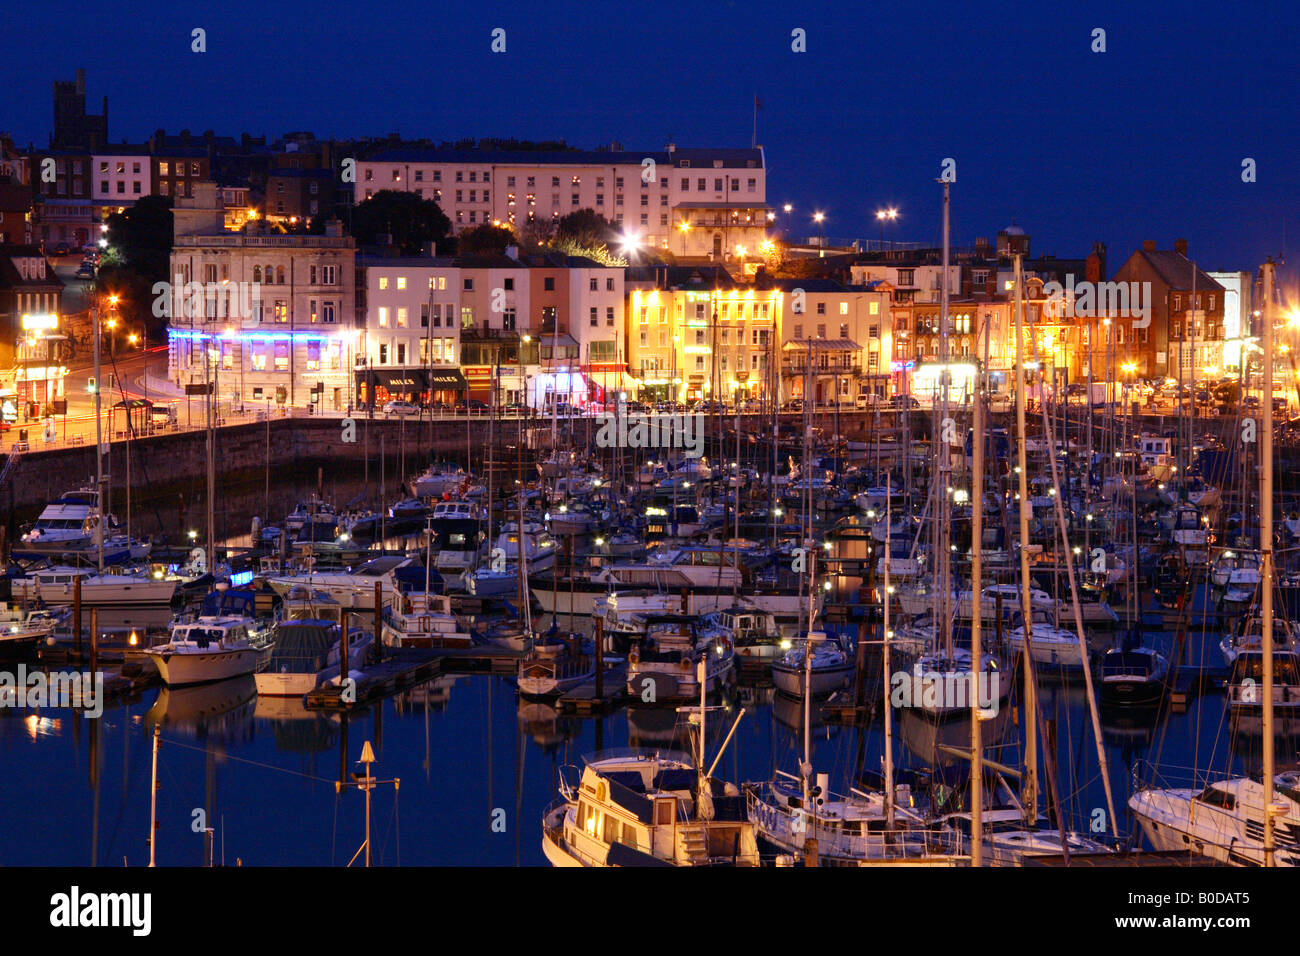 Ramsgate harbour and town at night. Stock Photo